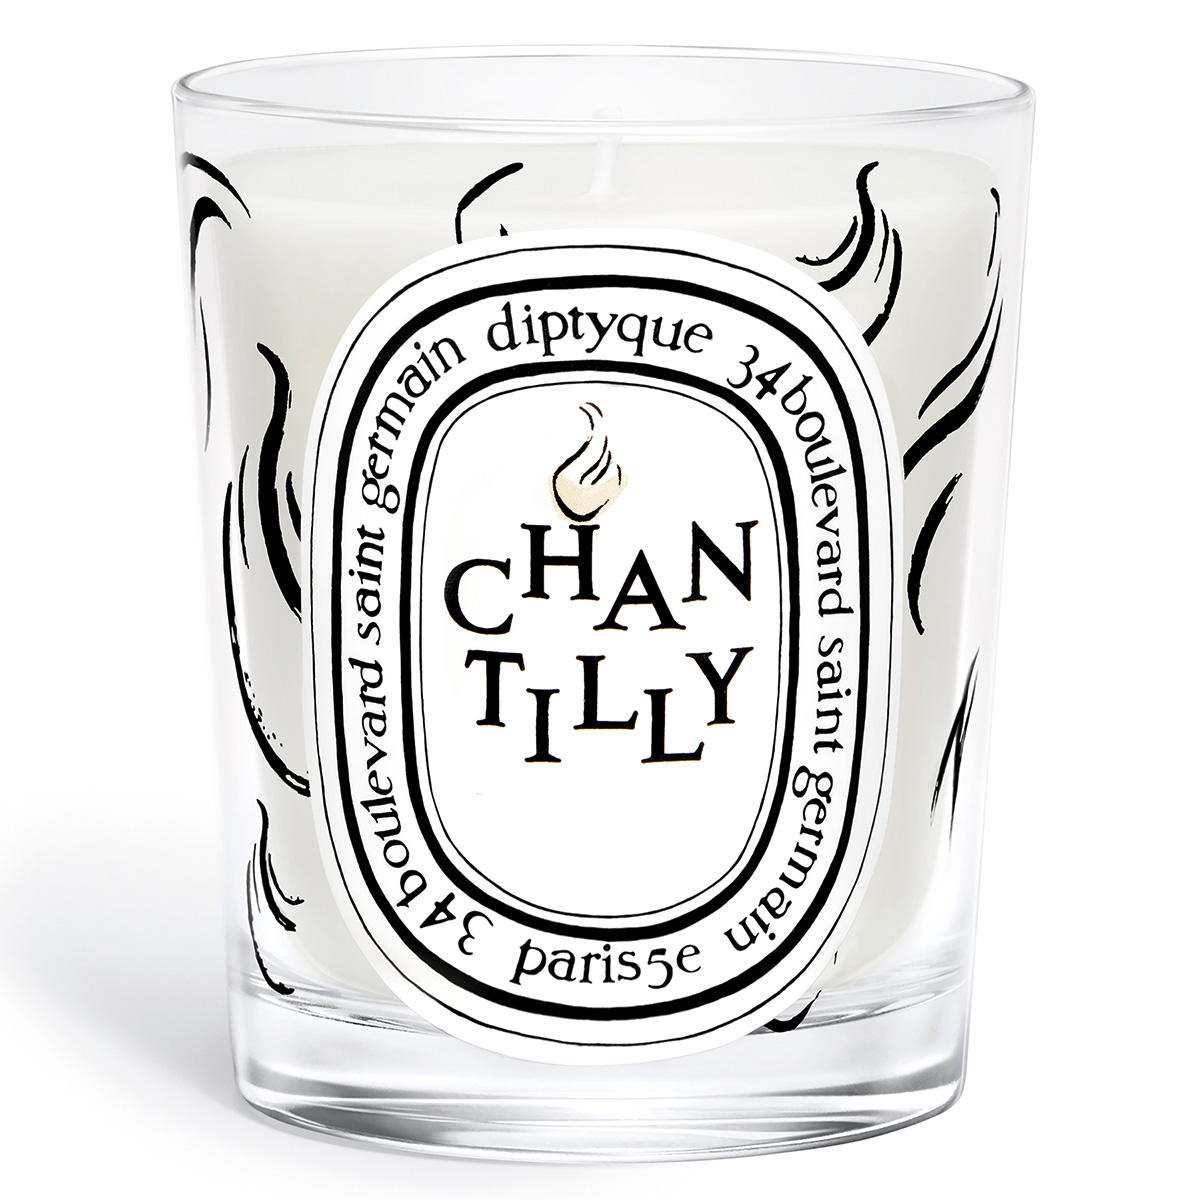 diptyque Chantilly scented candle 190 g - 1